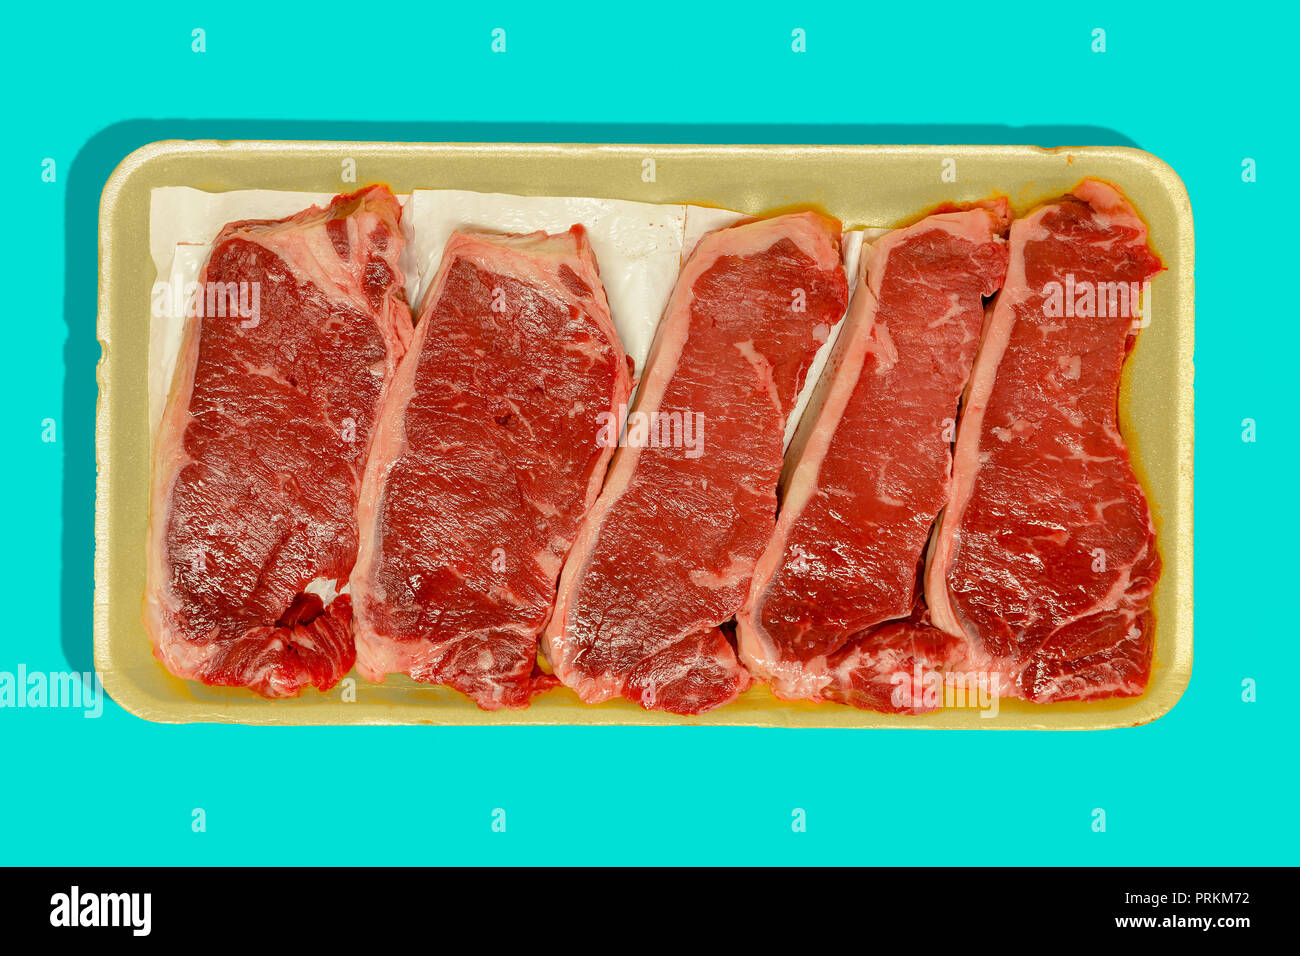 Retail packaging with five raw flat iron steaks , oyster blade steaks or butlers steaks from the shoulder isolated on blue Stock Photo